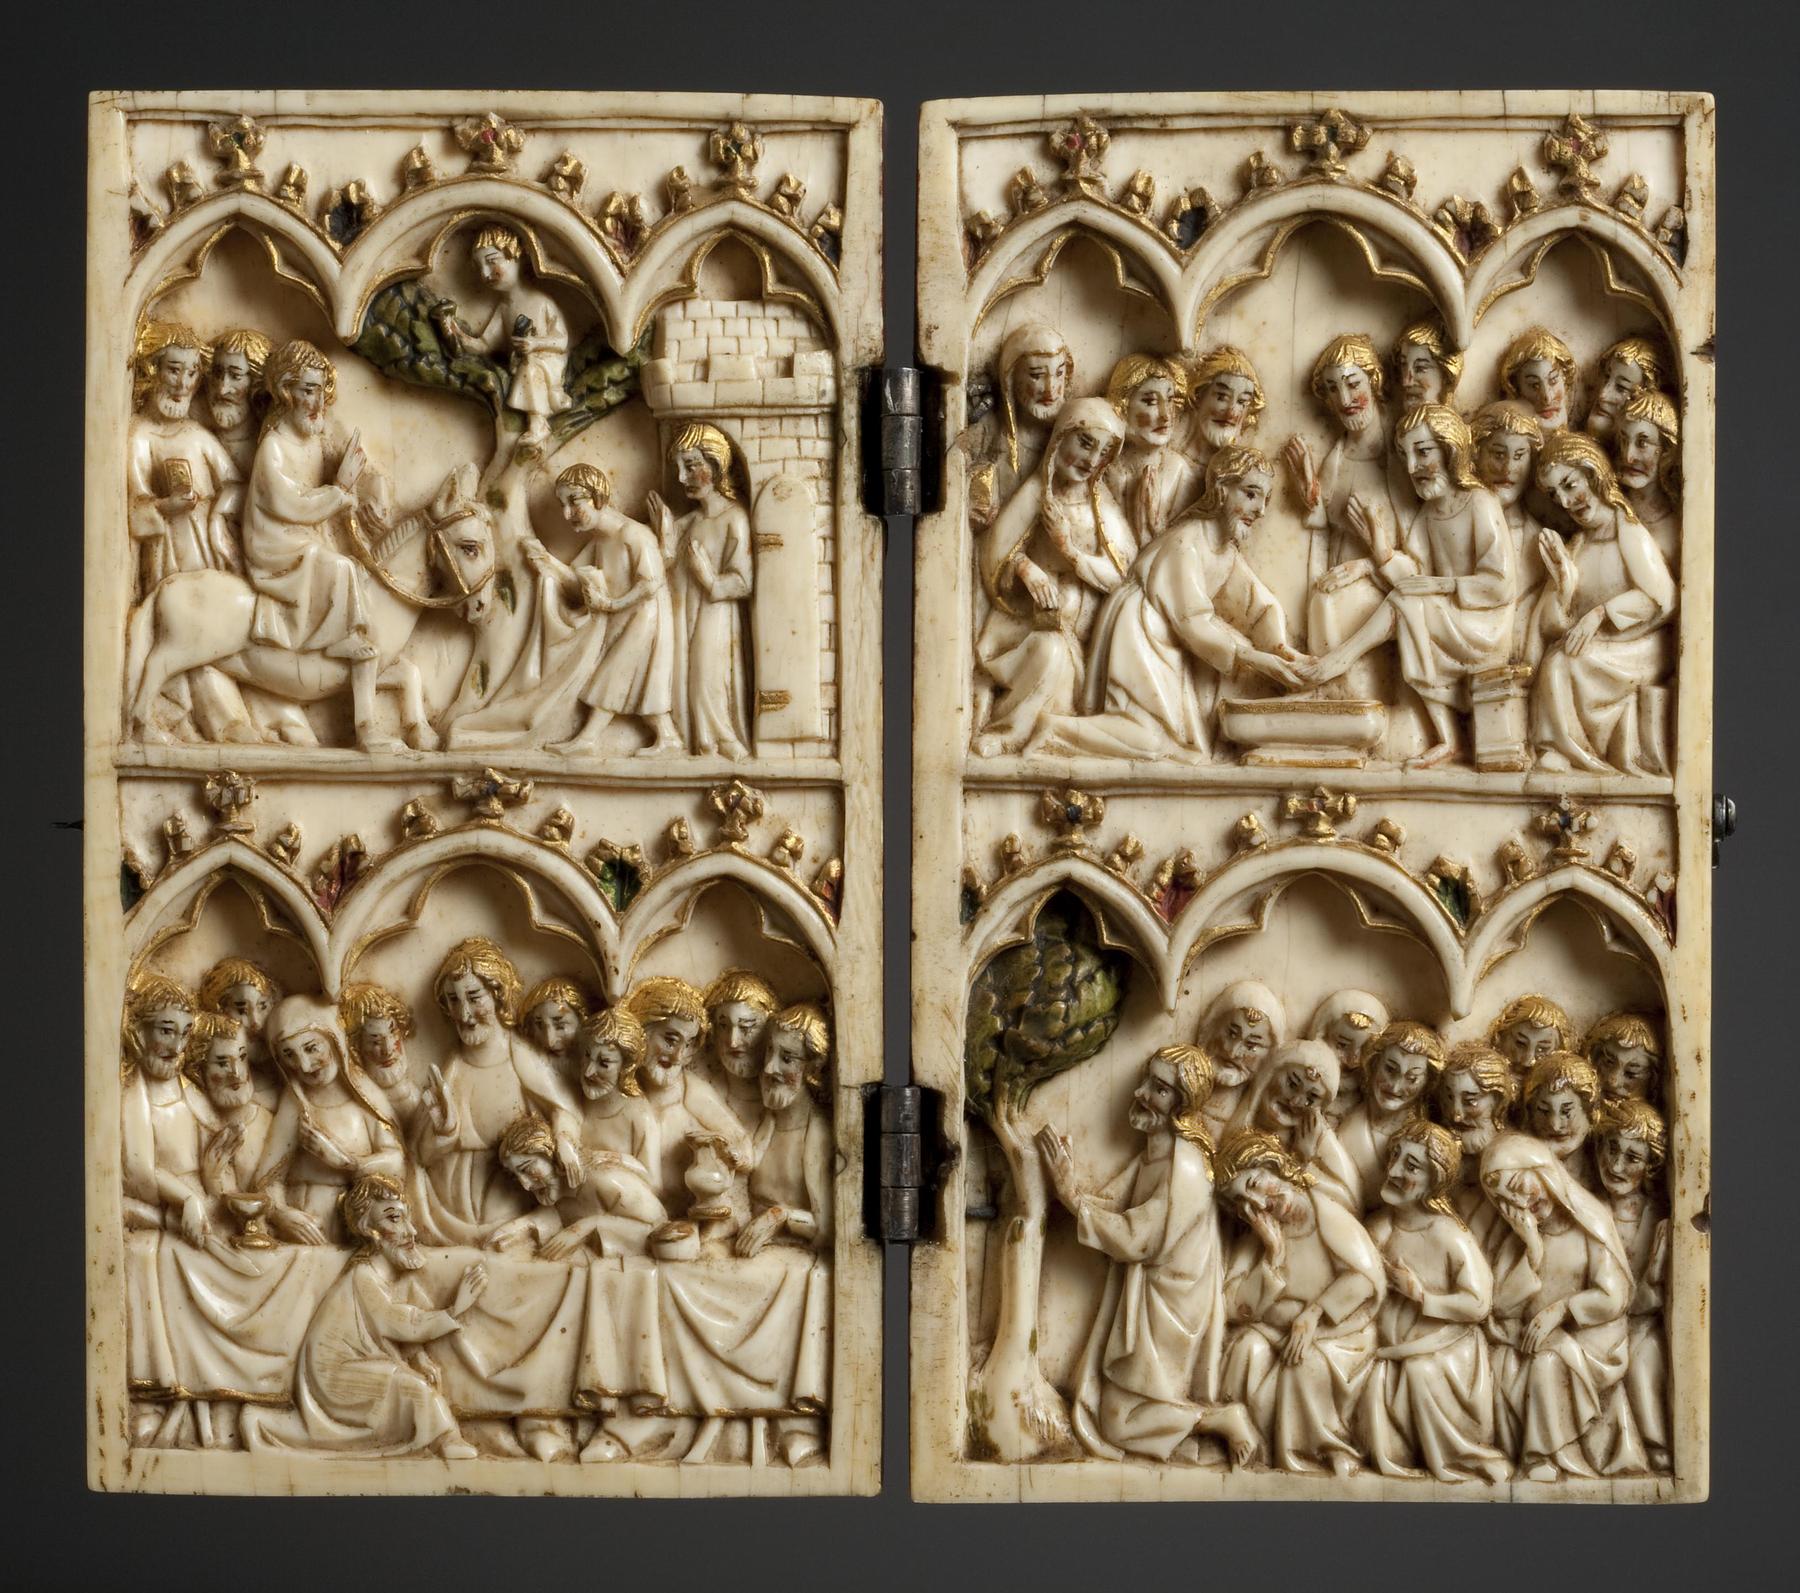 Diptych: The Entry into Jerusalem. The Last Supper. The Washing of the Feet. The Agony in the Garden. Madonna and Child. The Crucifixion, G54